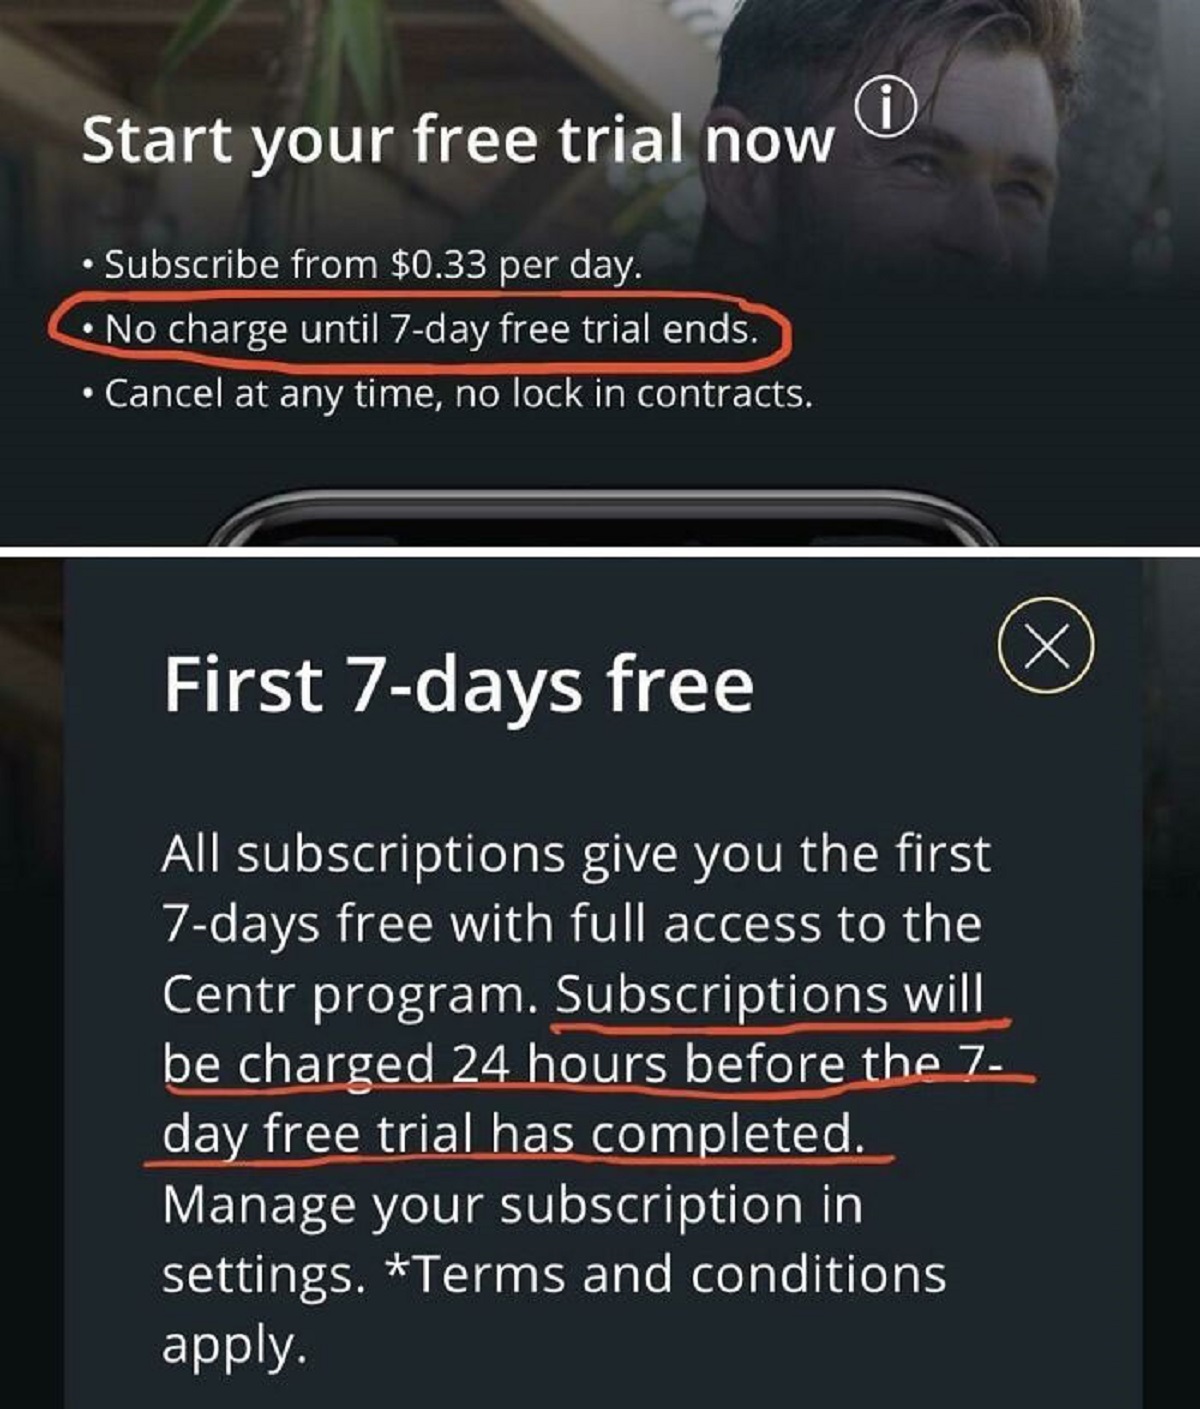 Chris Hemsworth’s Centr App Was Charging People Who Signed Up For Their Free Trial. Looked Into The Fine Print And Found Out Why. I Love Ya Mate But C’mon